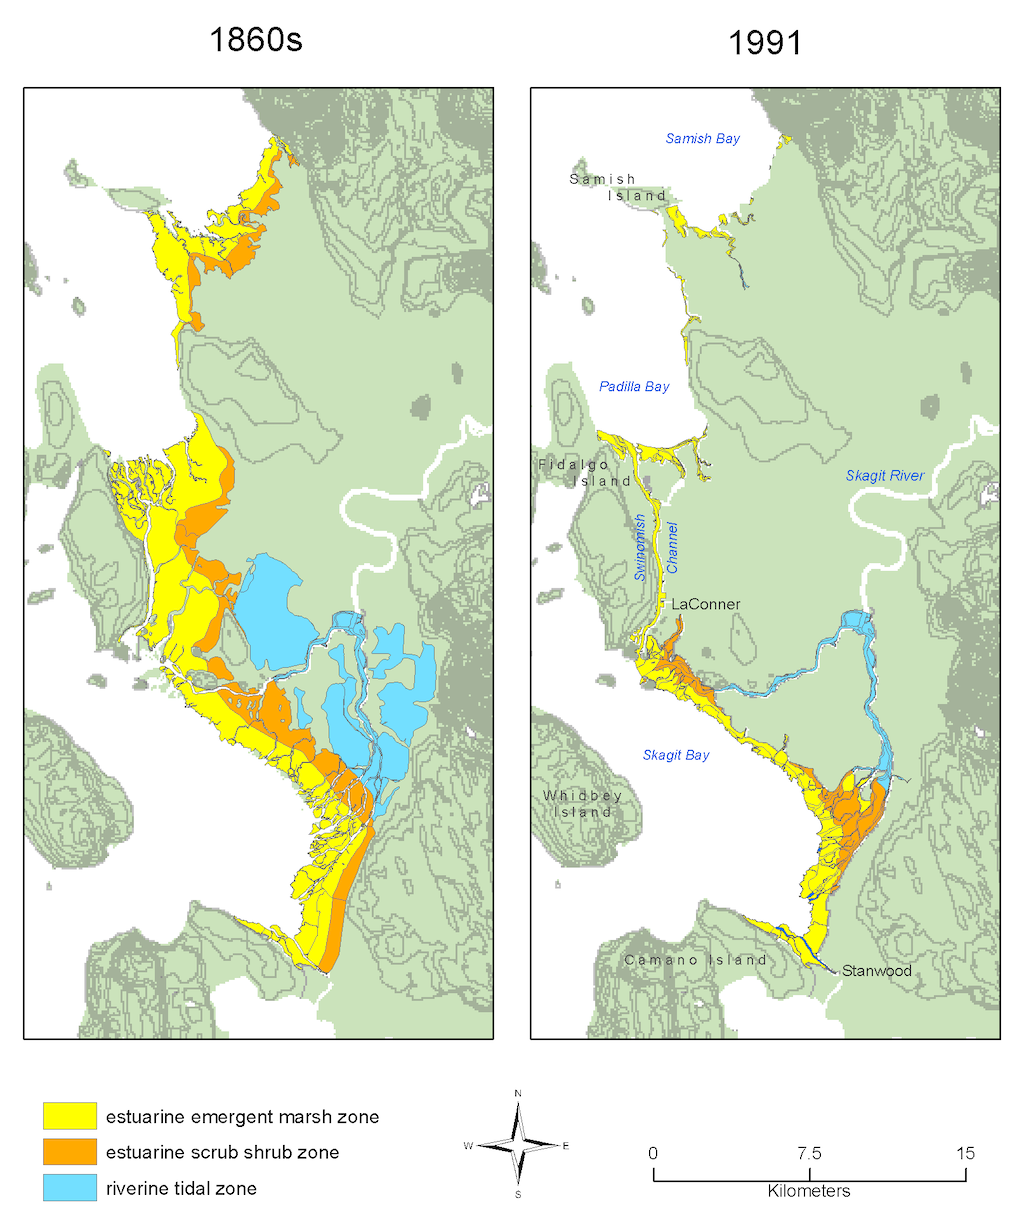 Two maps of the Skagit River Delta comparing a larger area of estuary habitat in the 1860s to a smaller area in 1991.